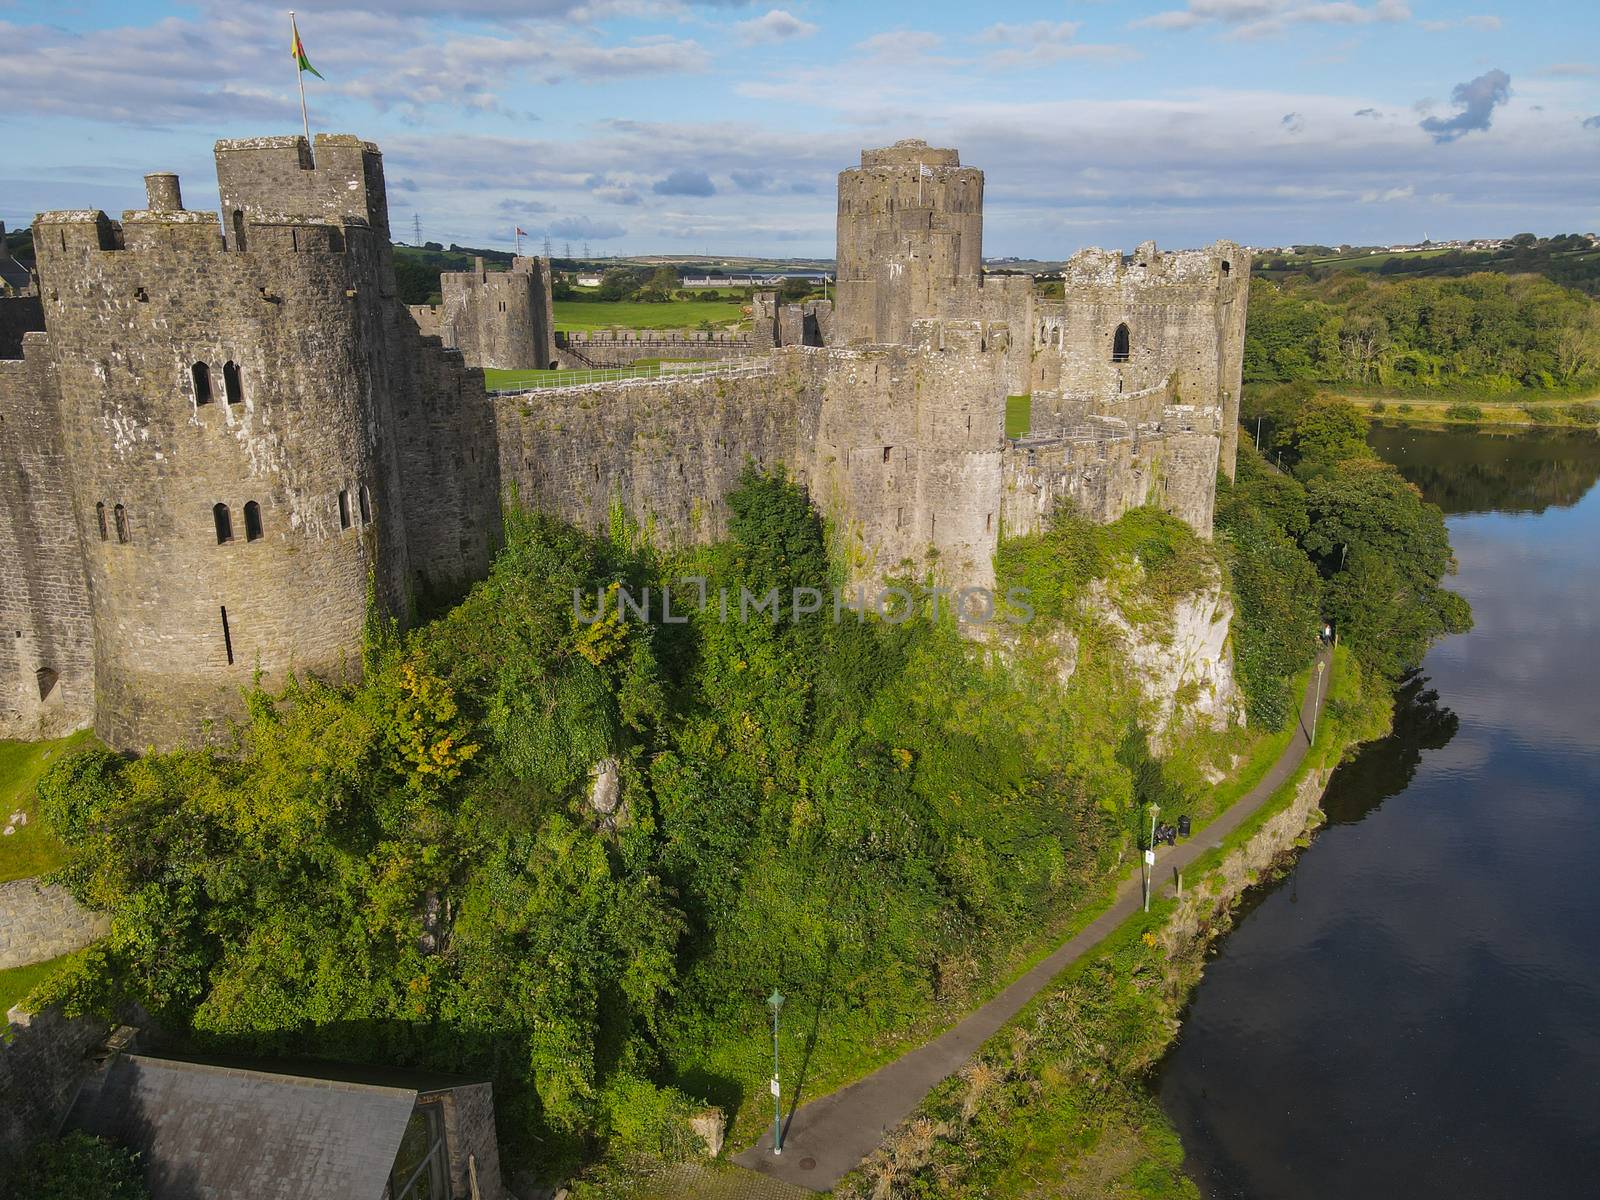 A Stunning View of Pembroke Castle From Across The Moat by WCLUK